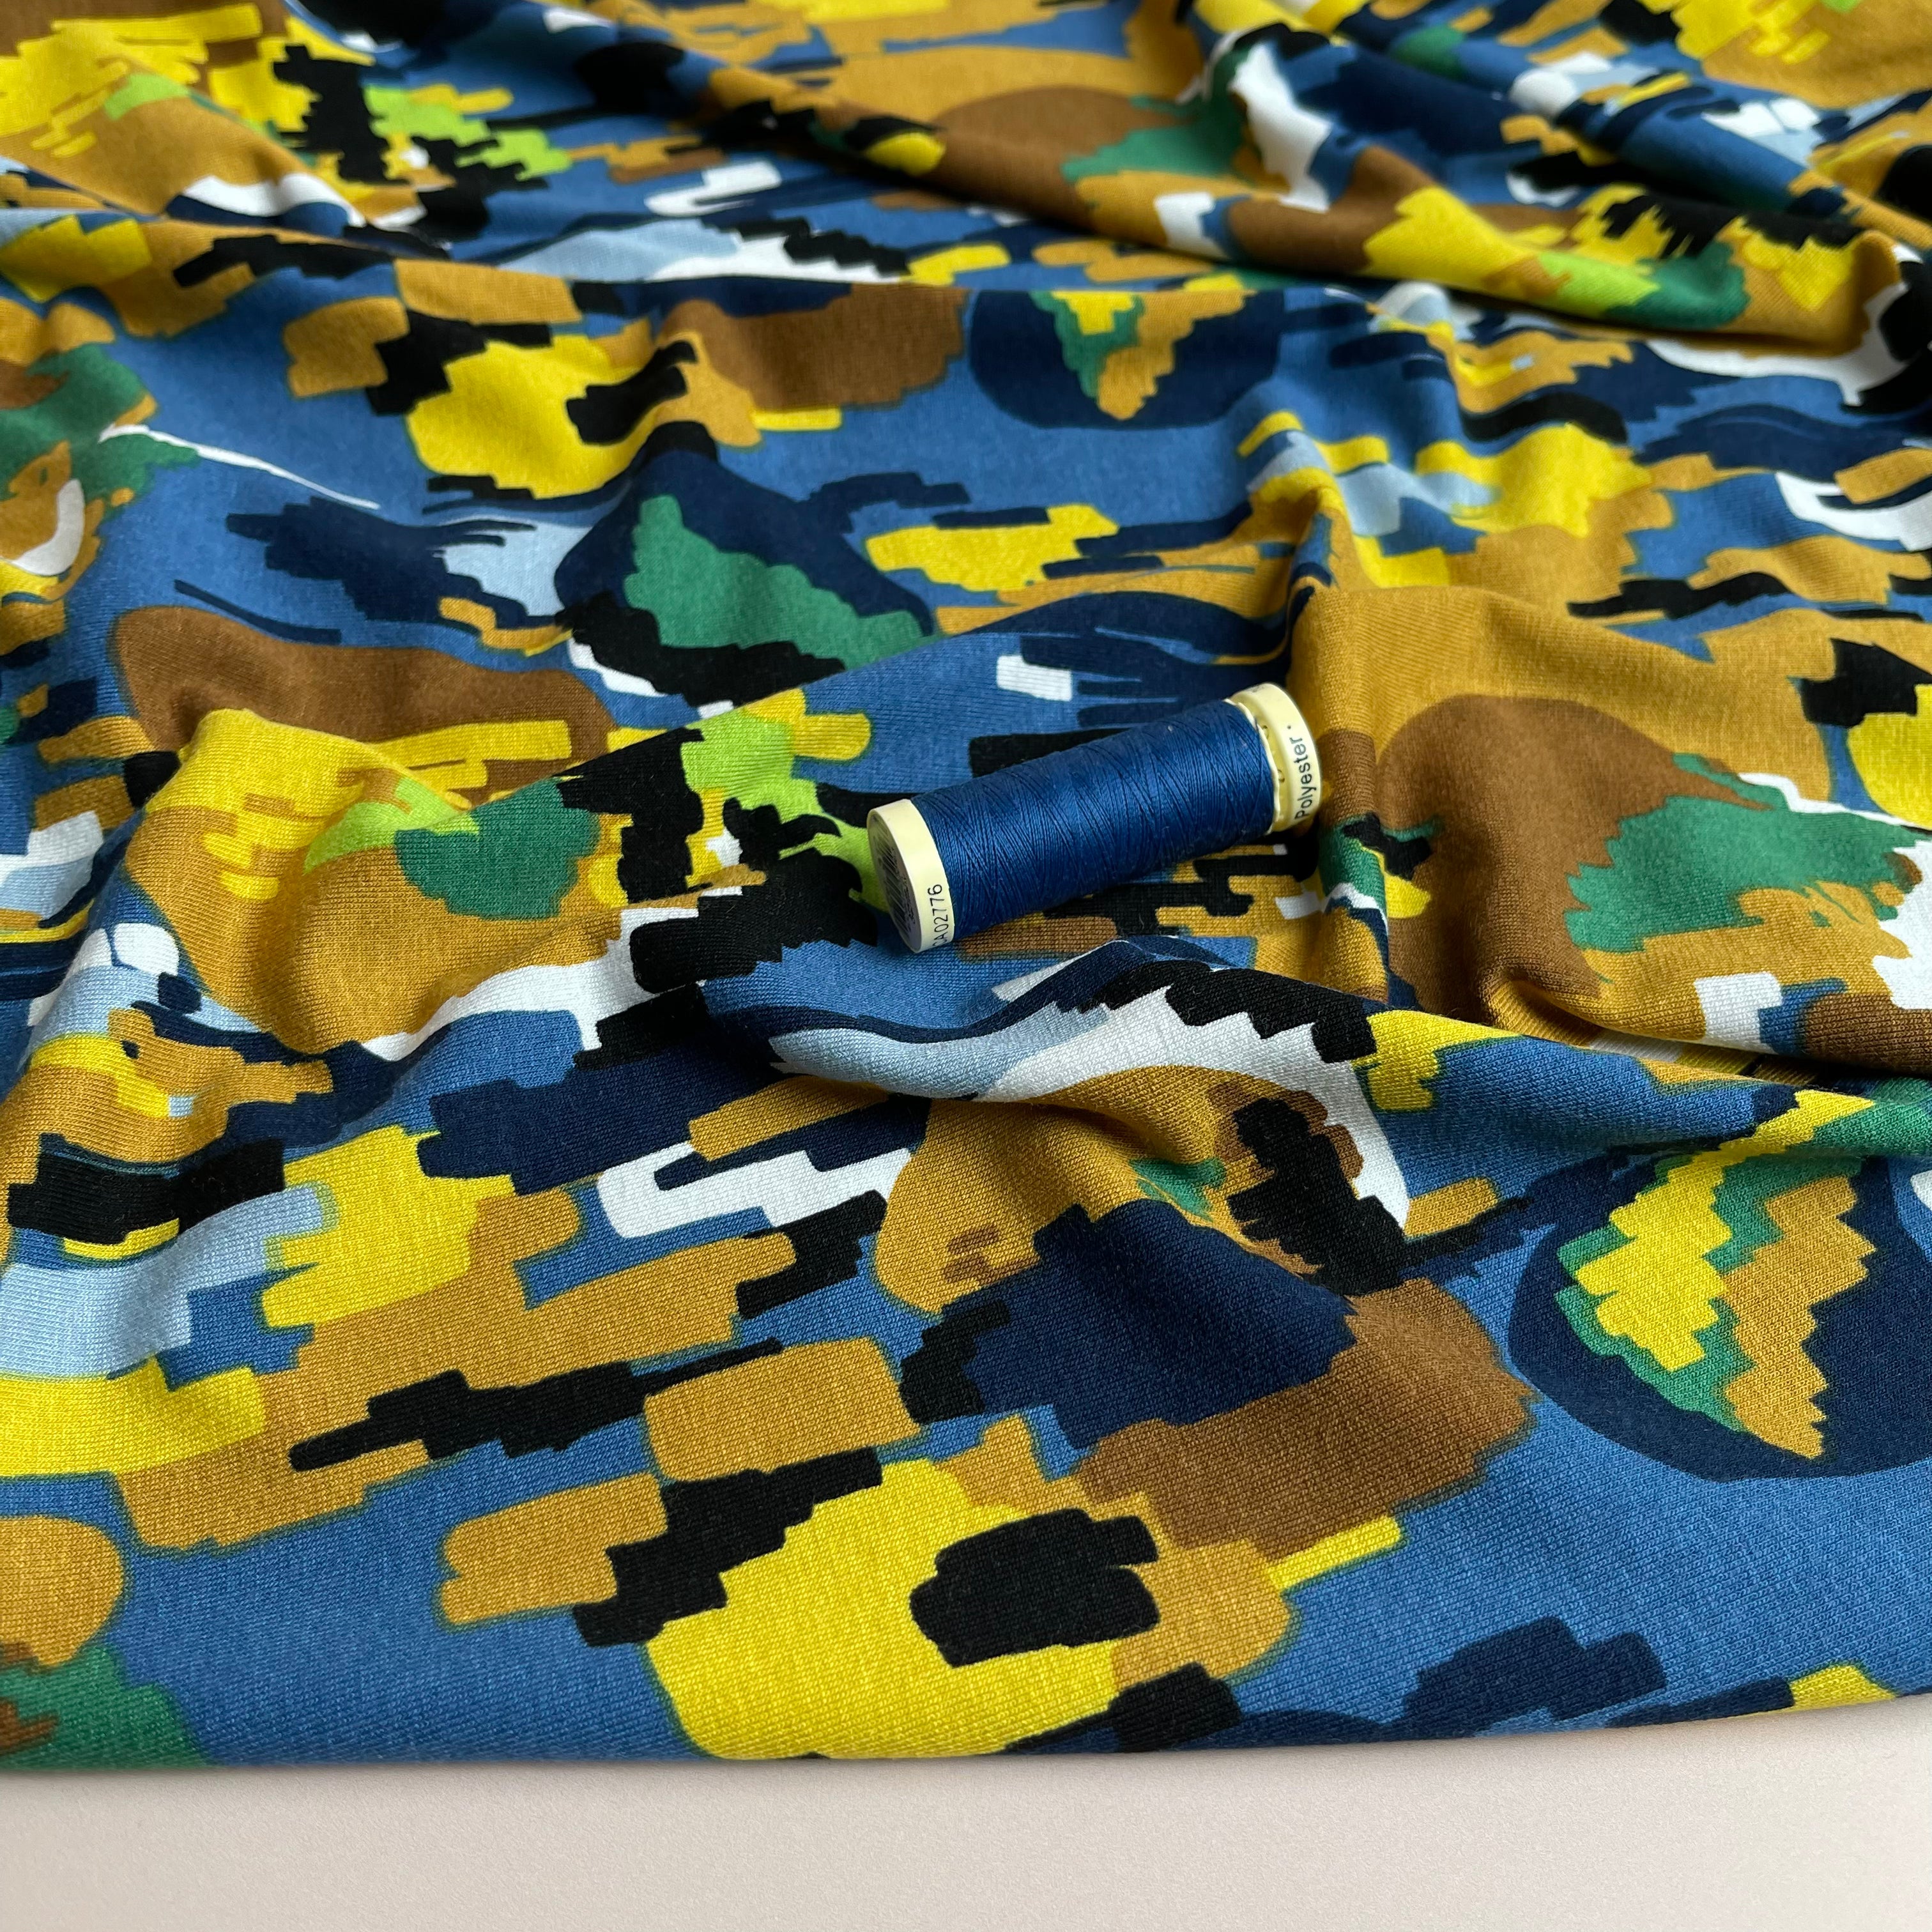 REMNANT 2.3 Metres (Test hole measuring 18cm at 77cm from edge) - Pixel Flowers in Blue Viscose Jersey Fabric